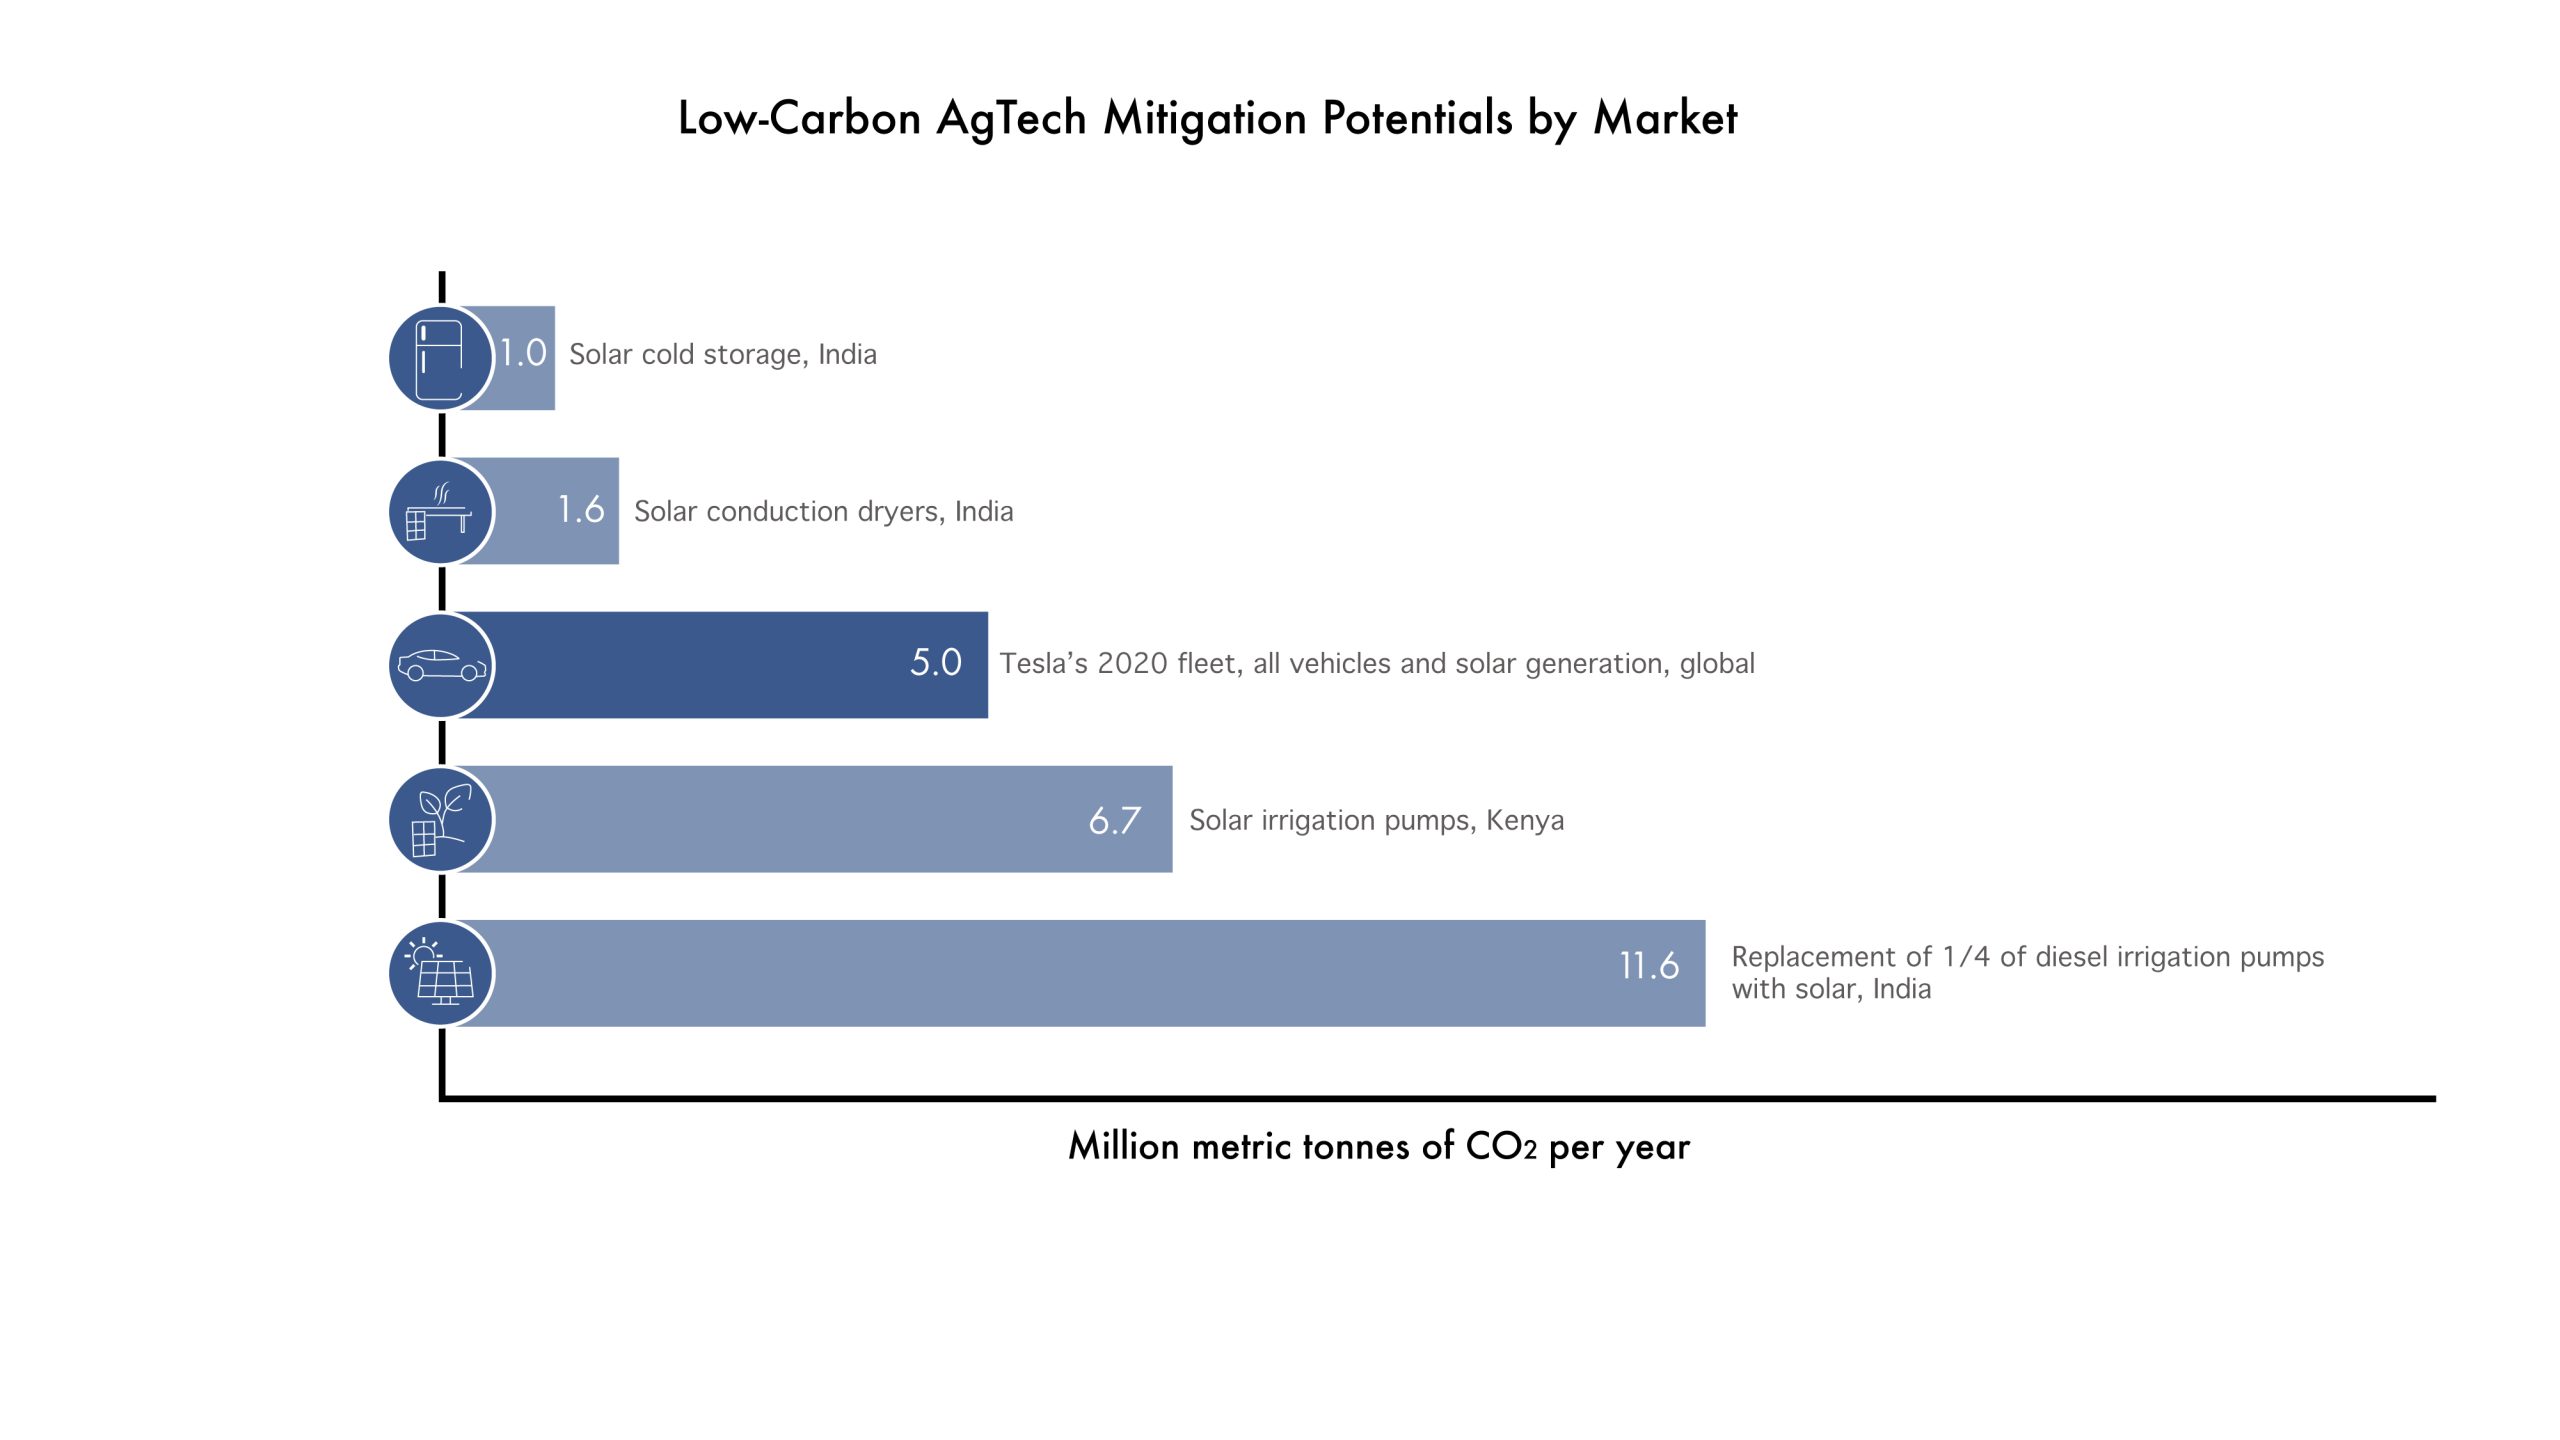 Graph showing carbon mitigation potential of agricultural value chains